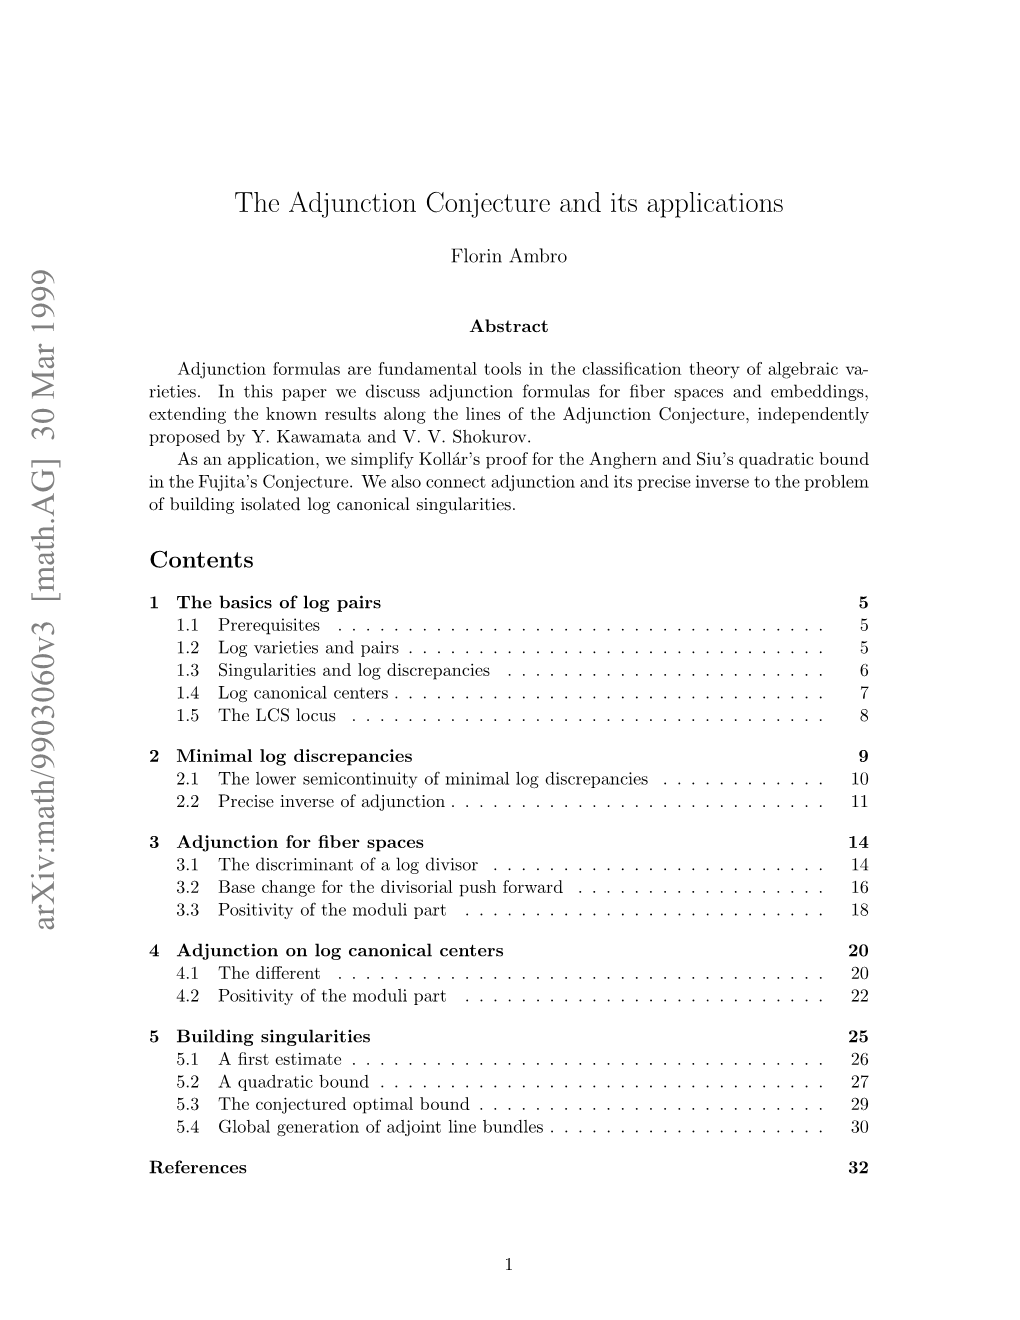 The Adjunction Conjecture and Its Applications